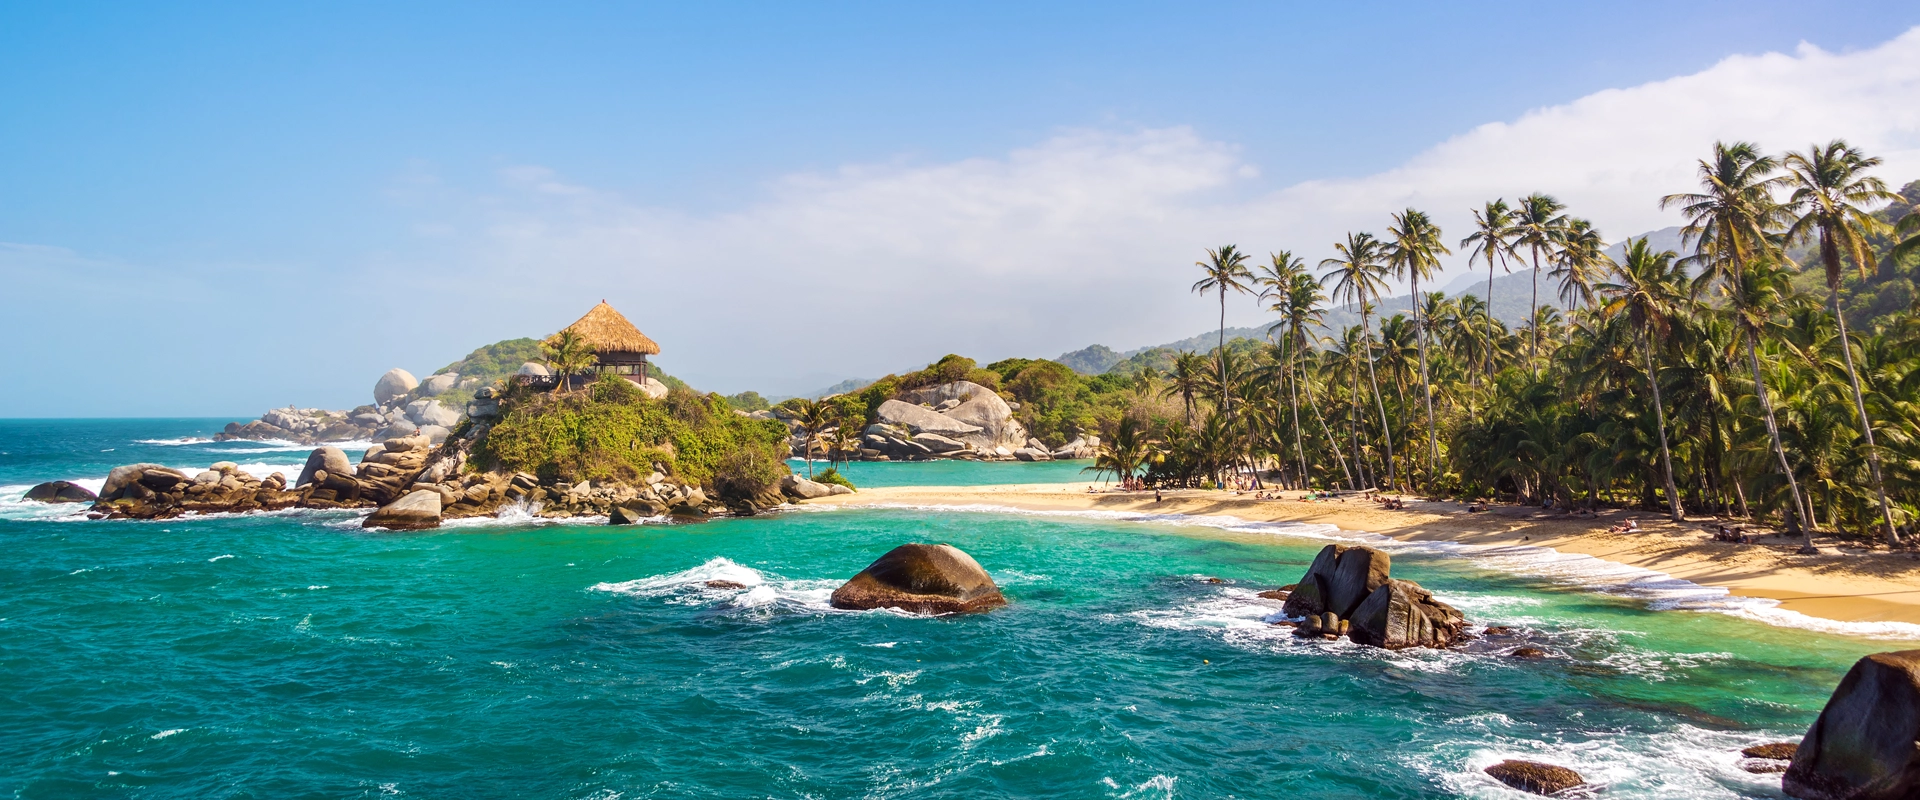 hotel luxe colombie tayrona plage